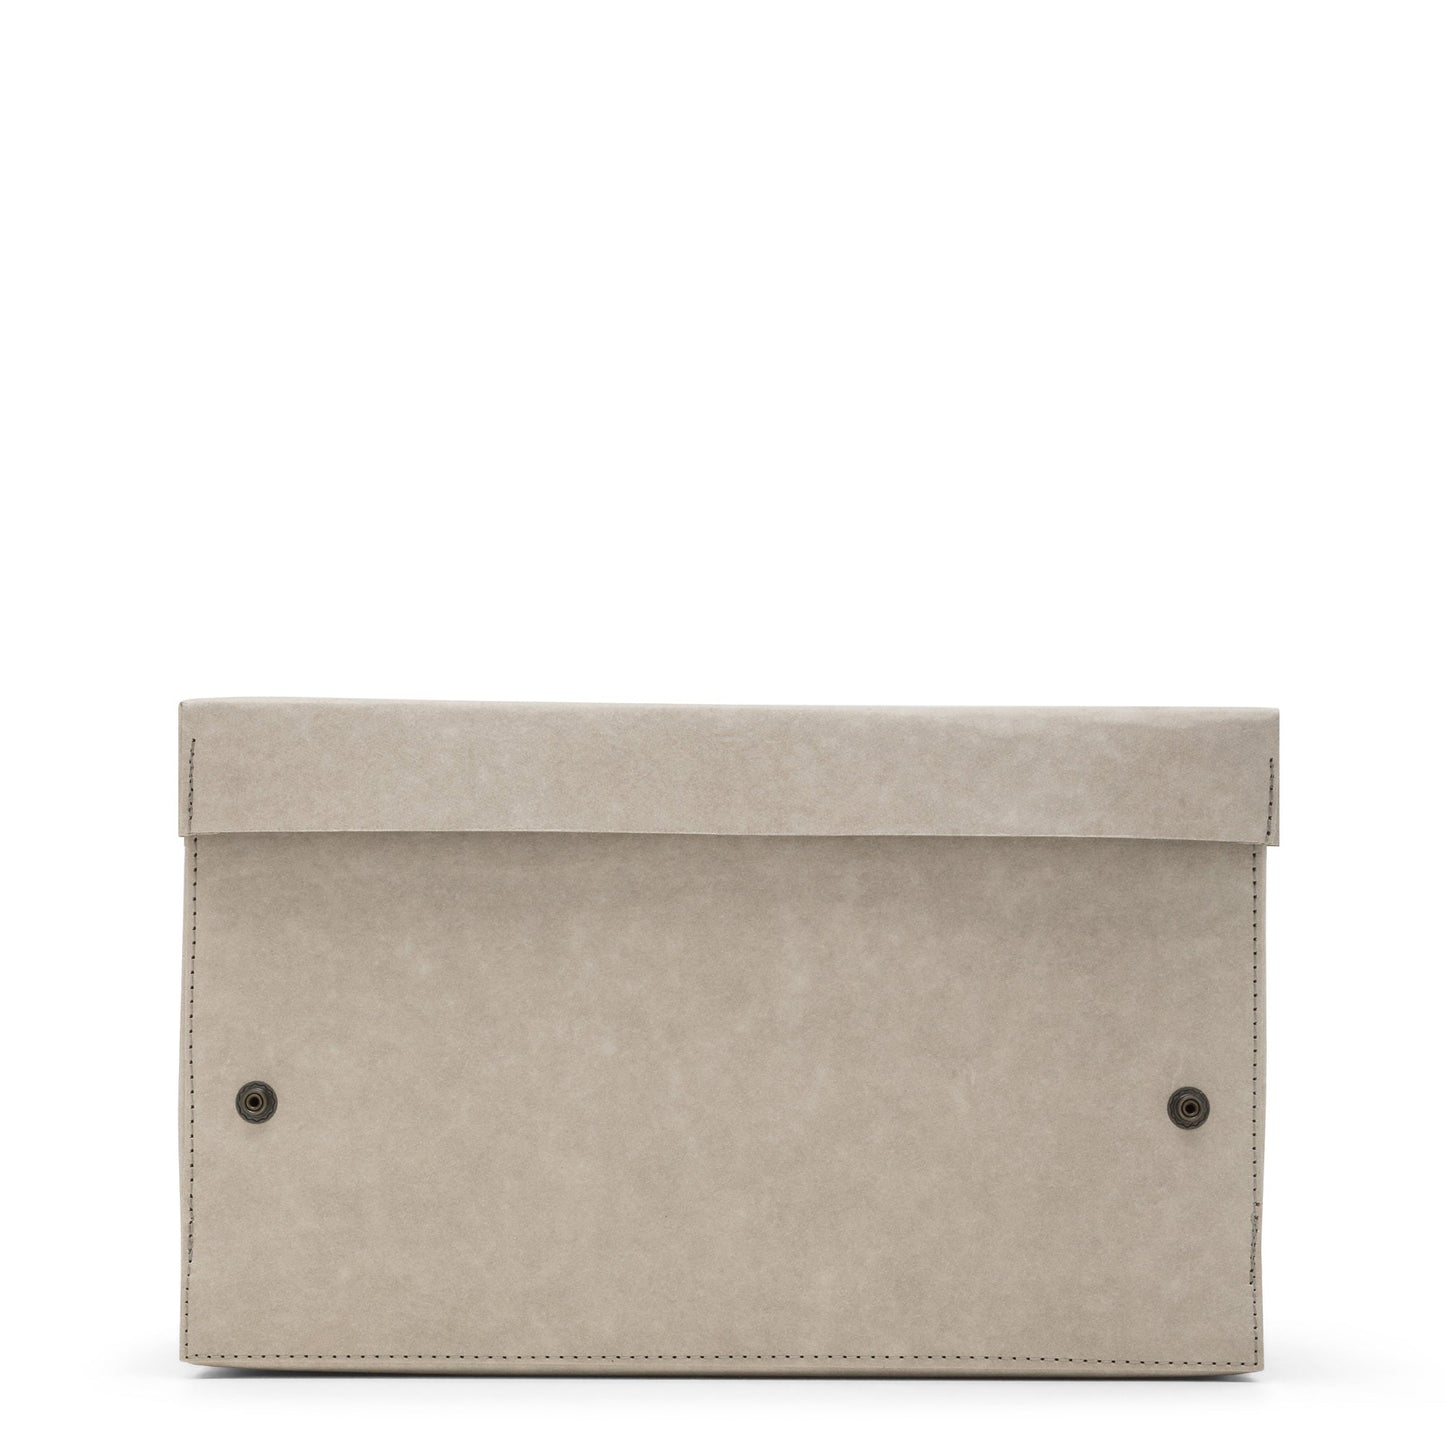 A grey lidded washable paper box is shown from the side angle.